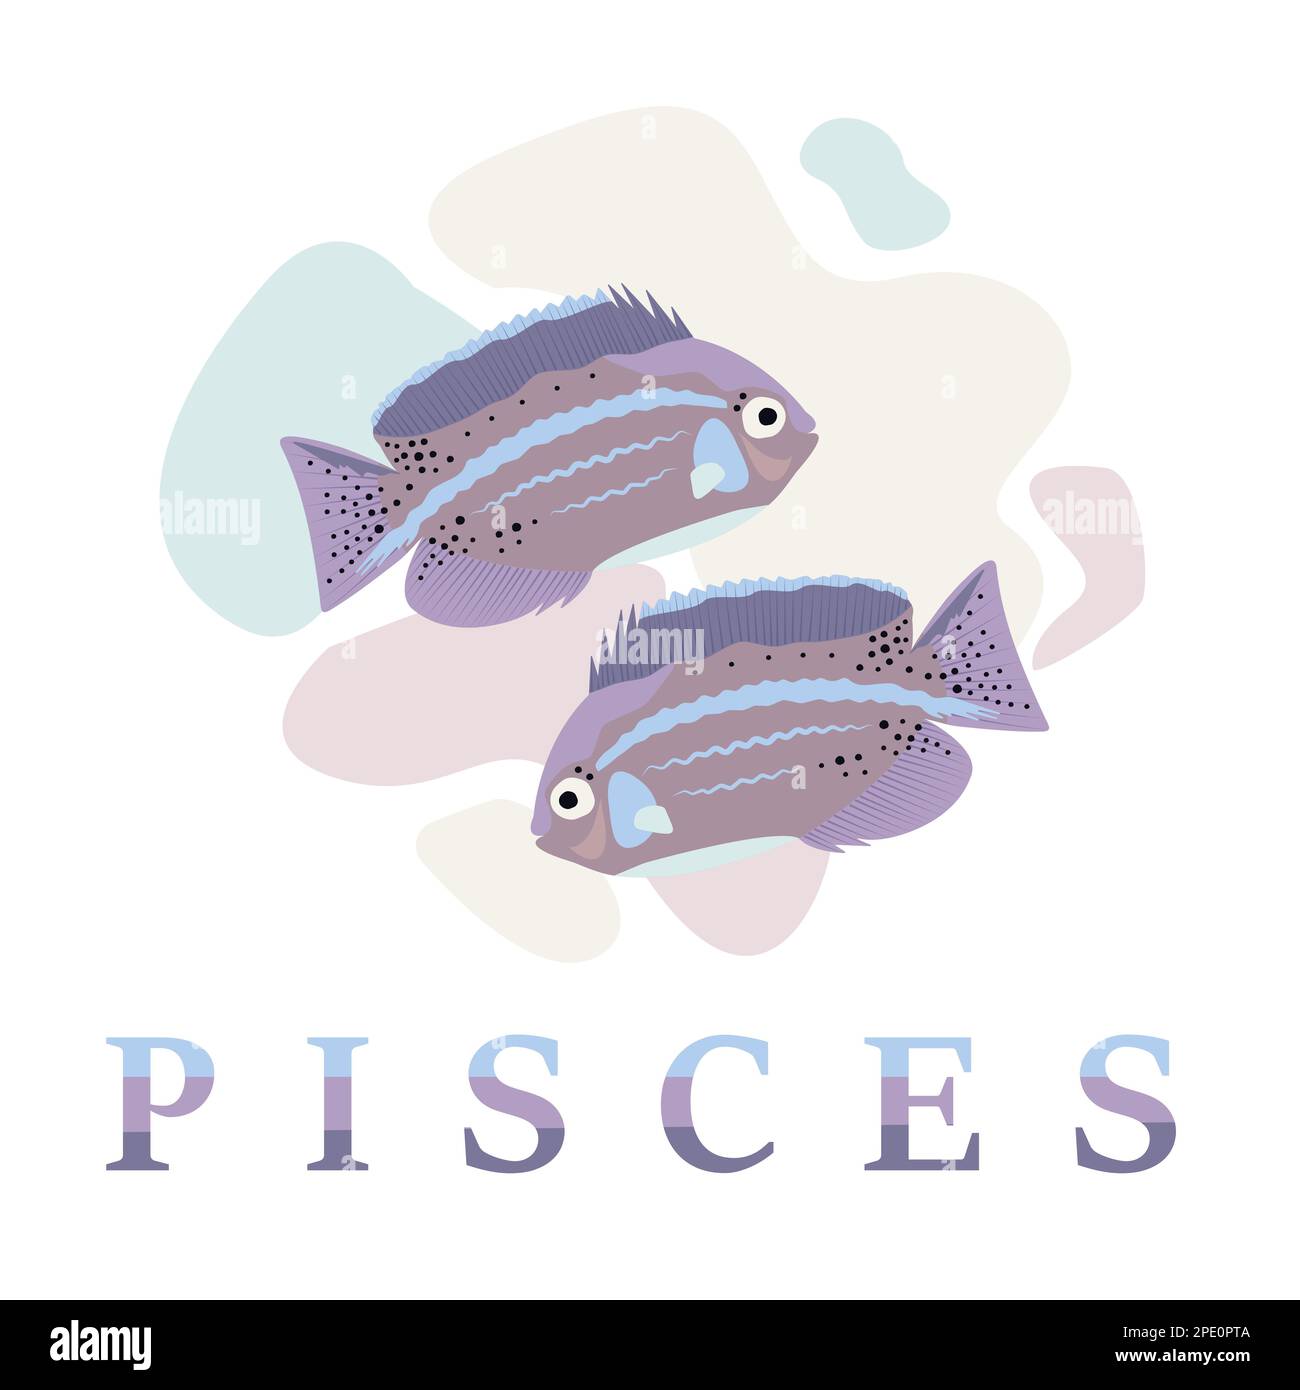 Pisces astrology Stock Vector Images - Alamy